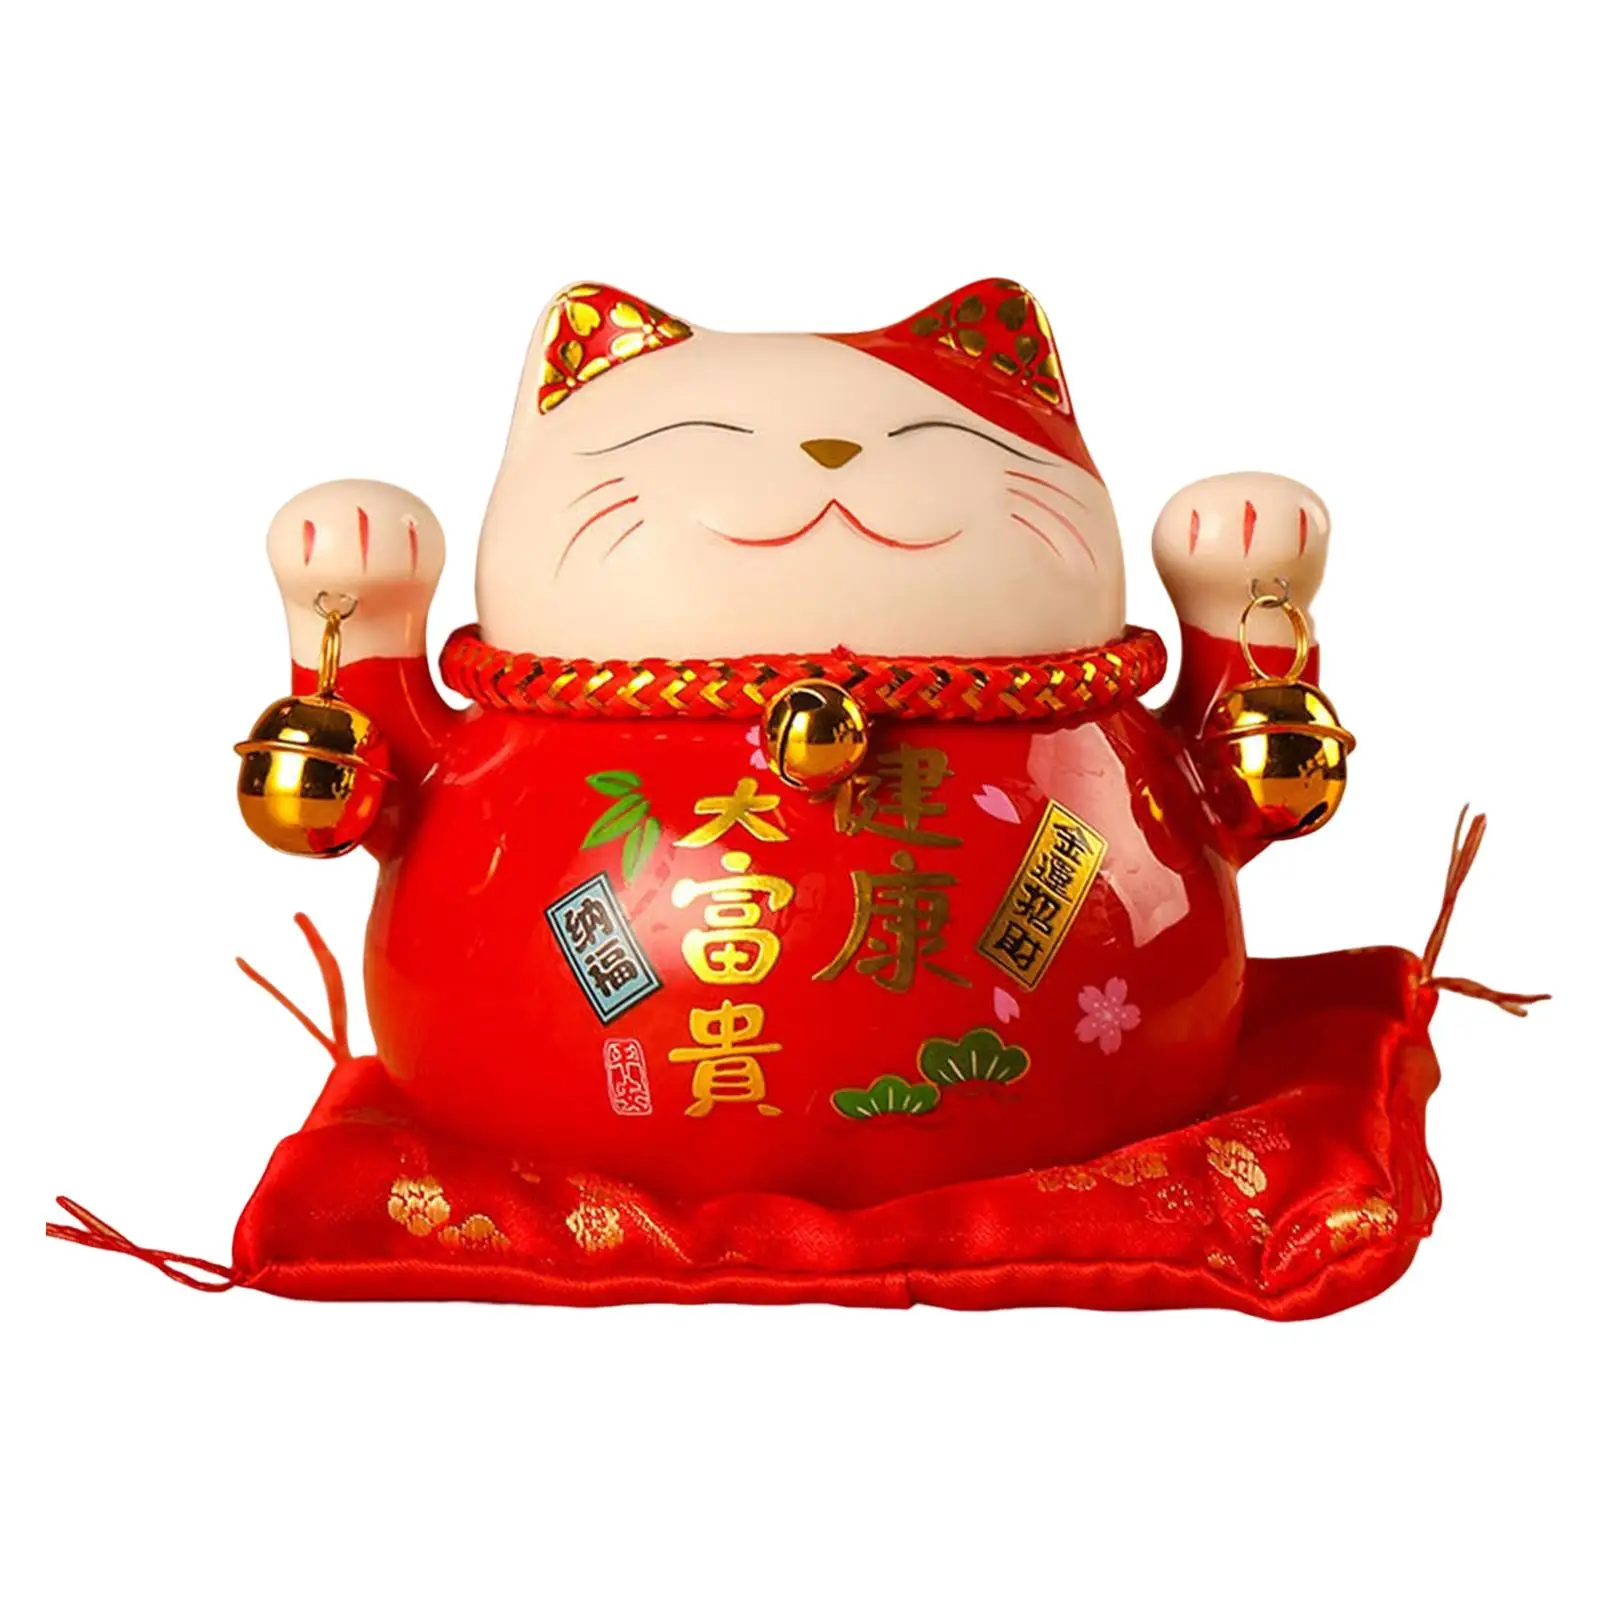 Porcelain Lucky Cat Money Bank Statues Storage Decoration Home Decor Crafts Display Chinese Style for Business Office Tabletop